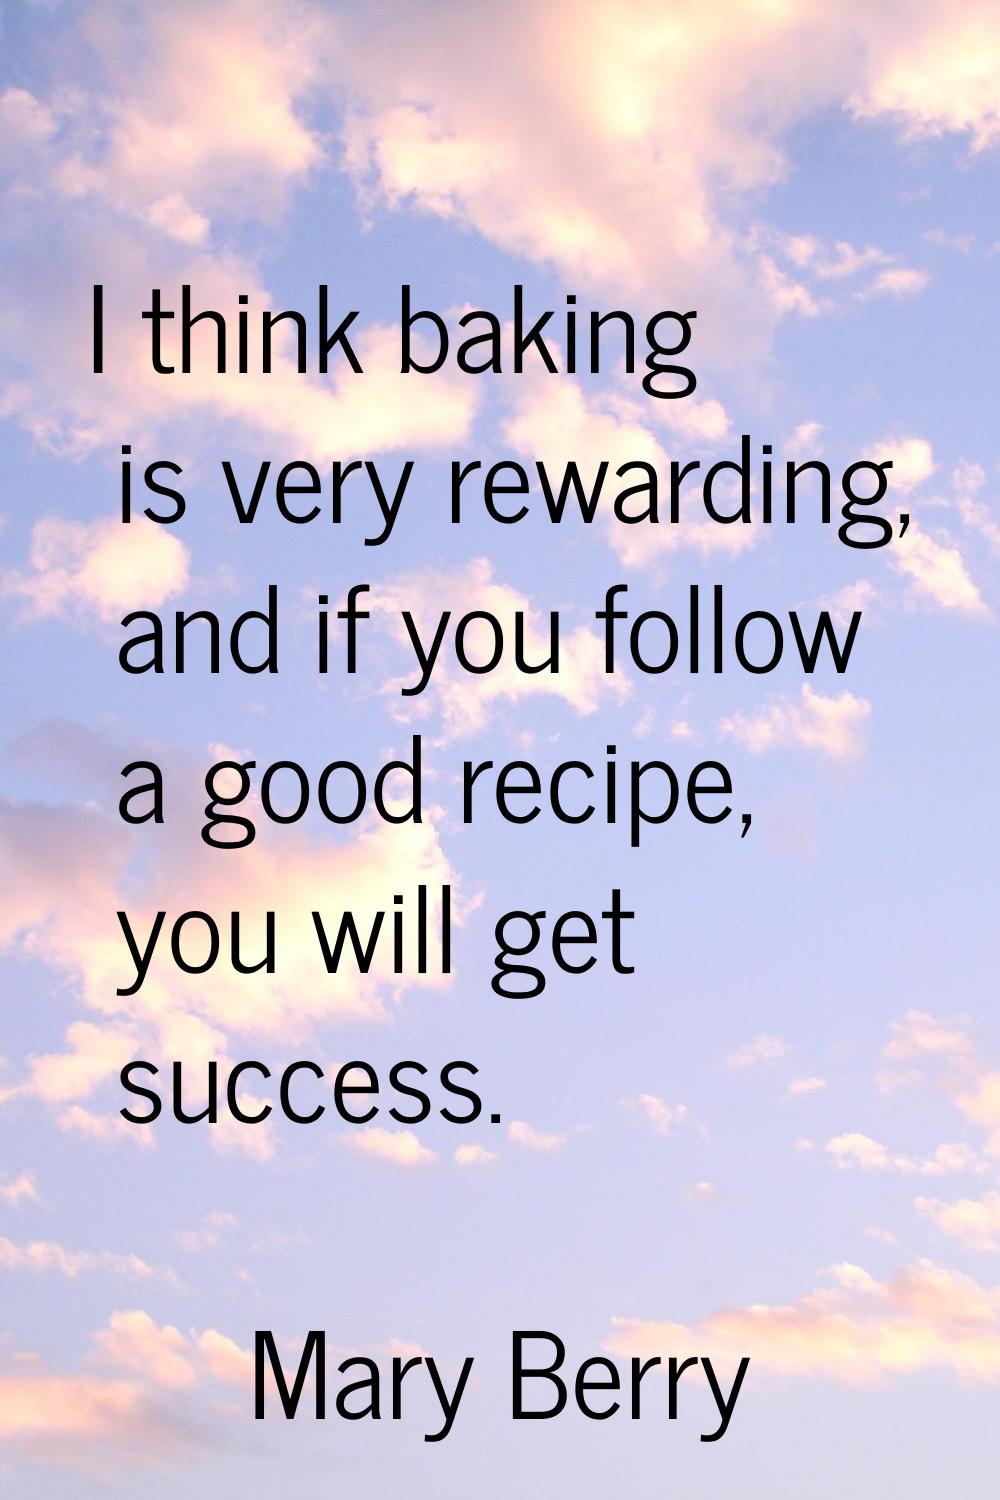 I think baking is very rewarding, and if you follow a good recipe, you will get success.